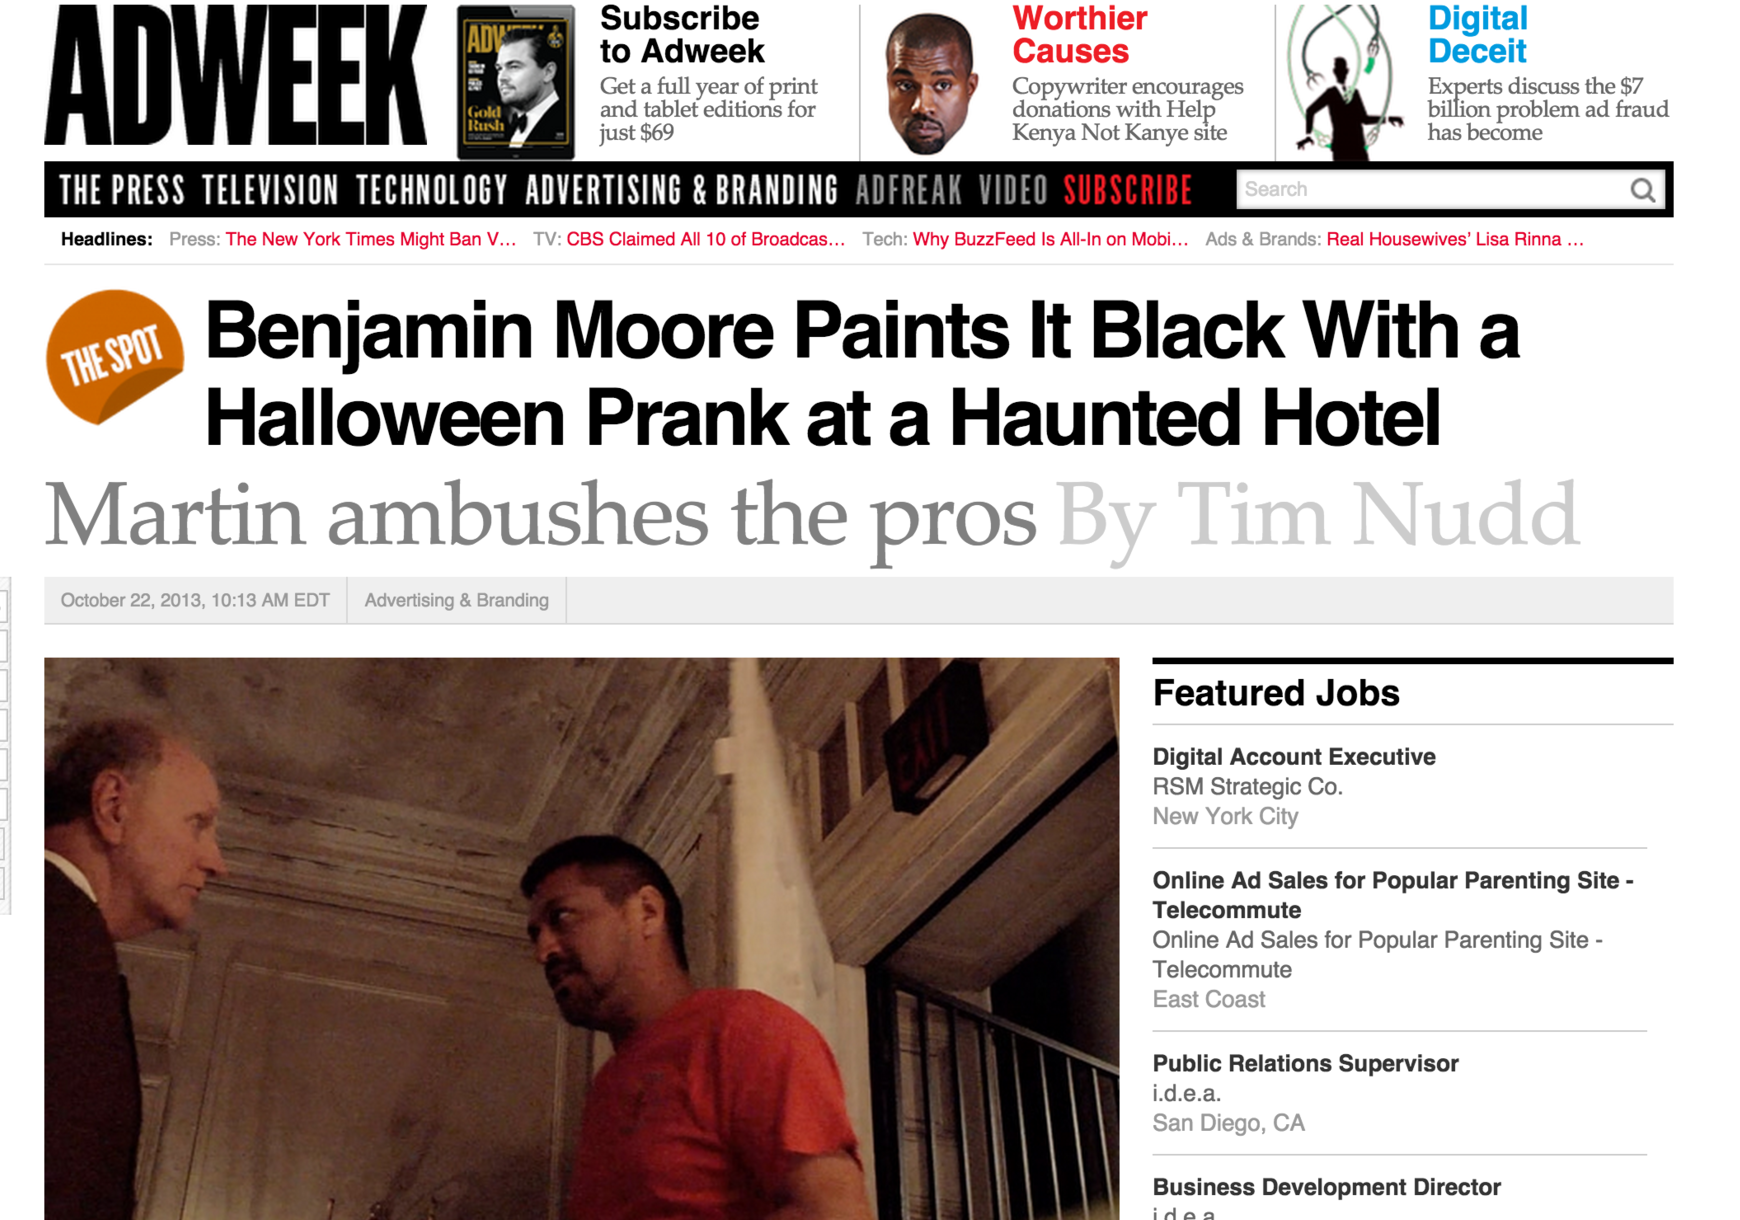 Benjamin Moore Paints It Black With a Halloween Prank at a Haunted Hotel